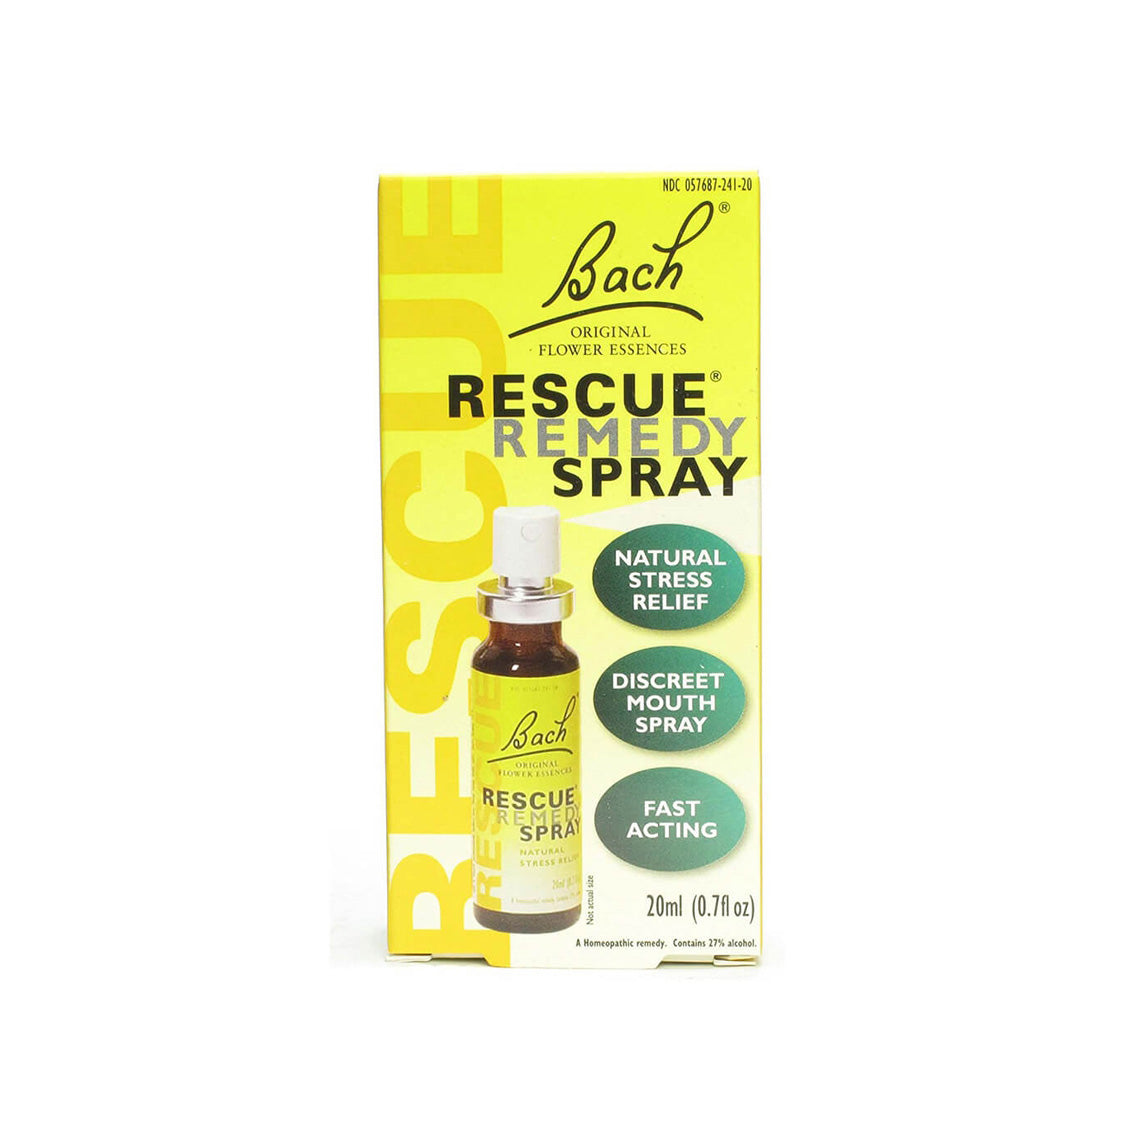 Rescue Remedy Dropper, 10mL - Natural Homeopathic Stress Relief